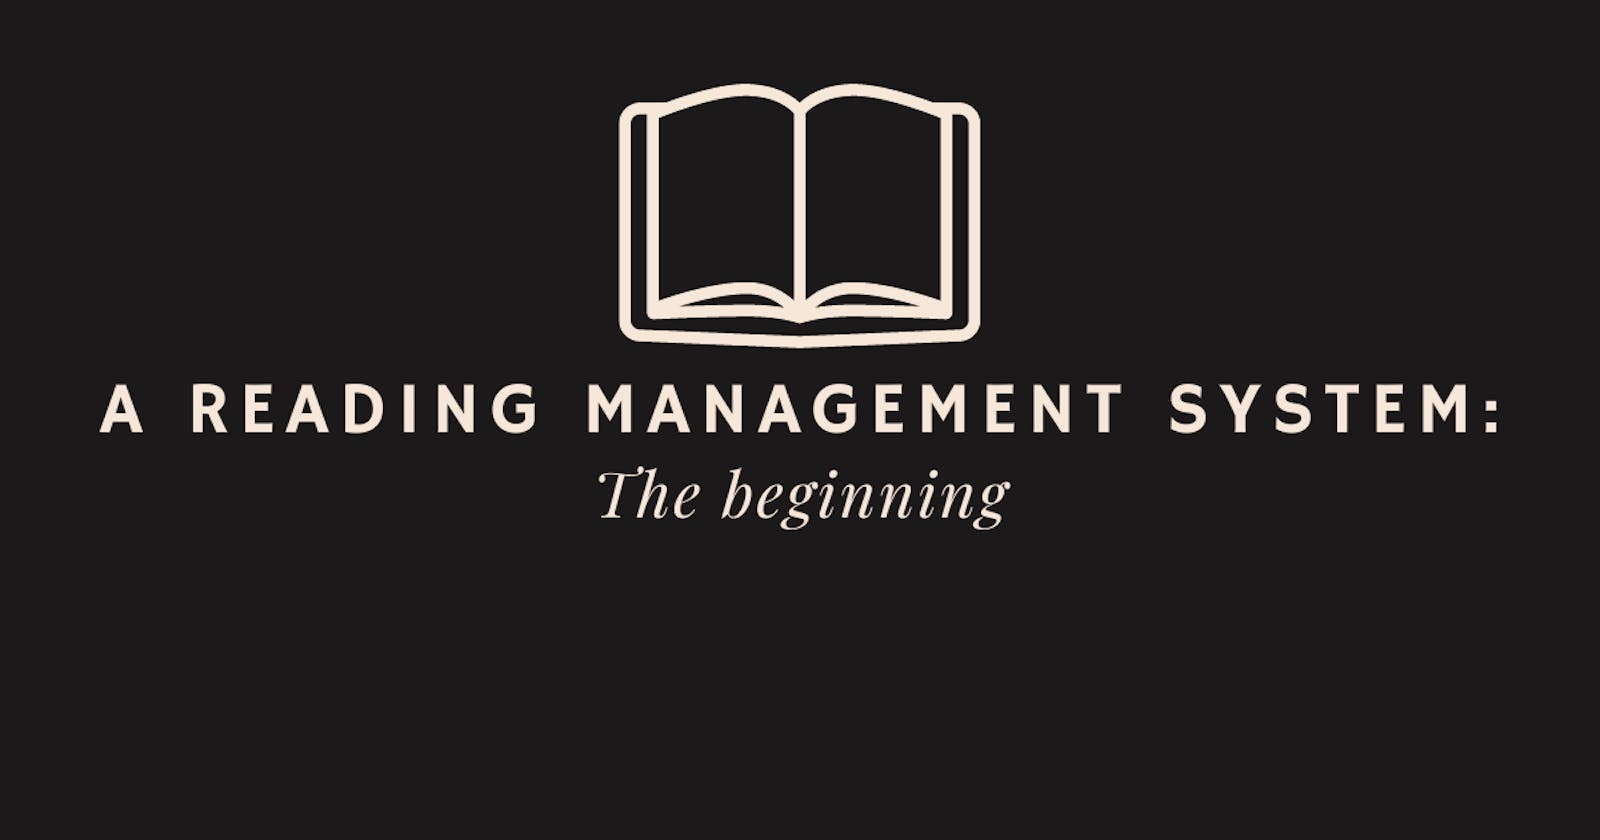 A reading management system: